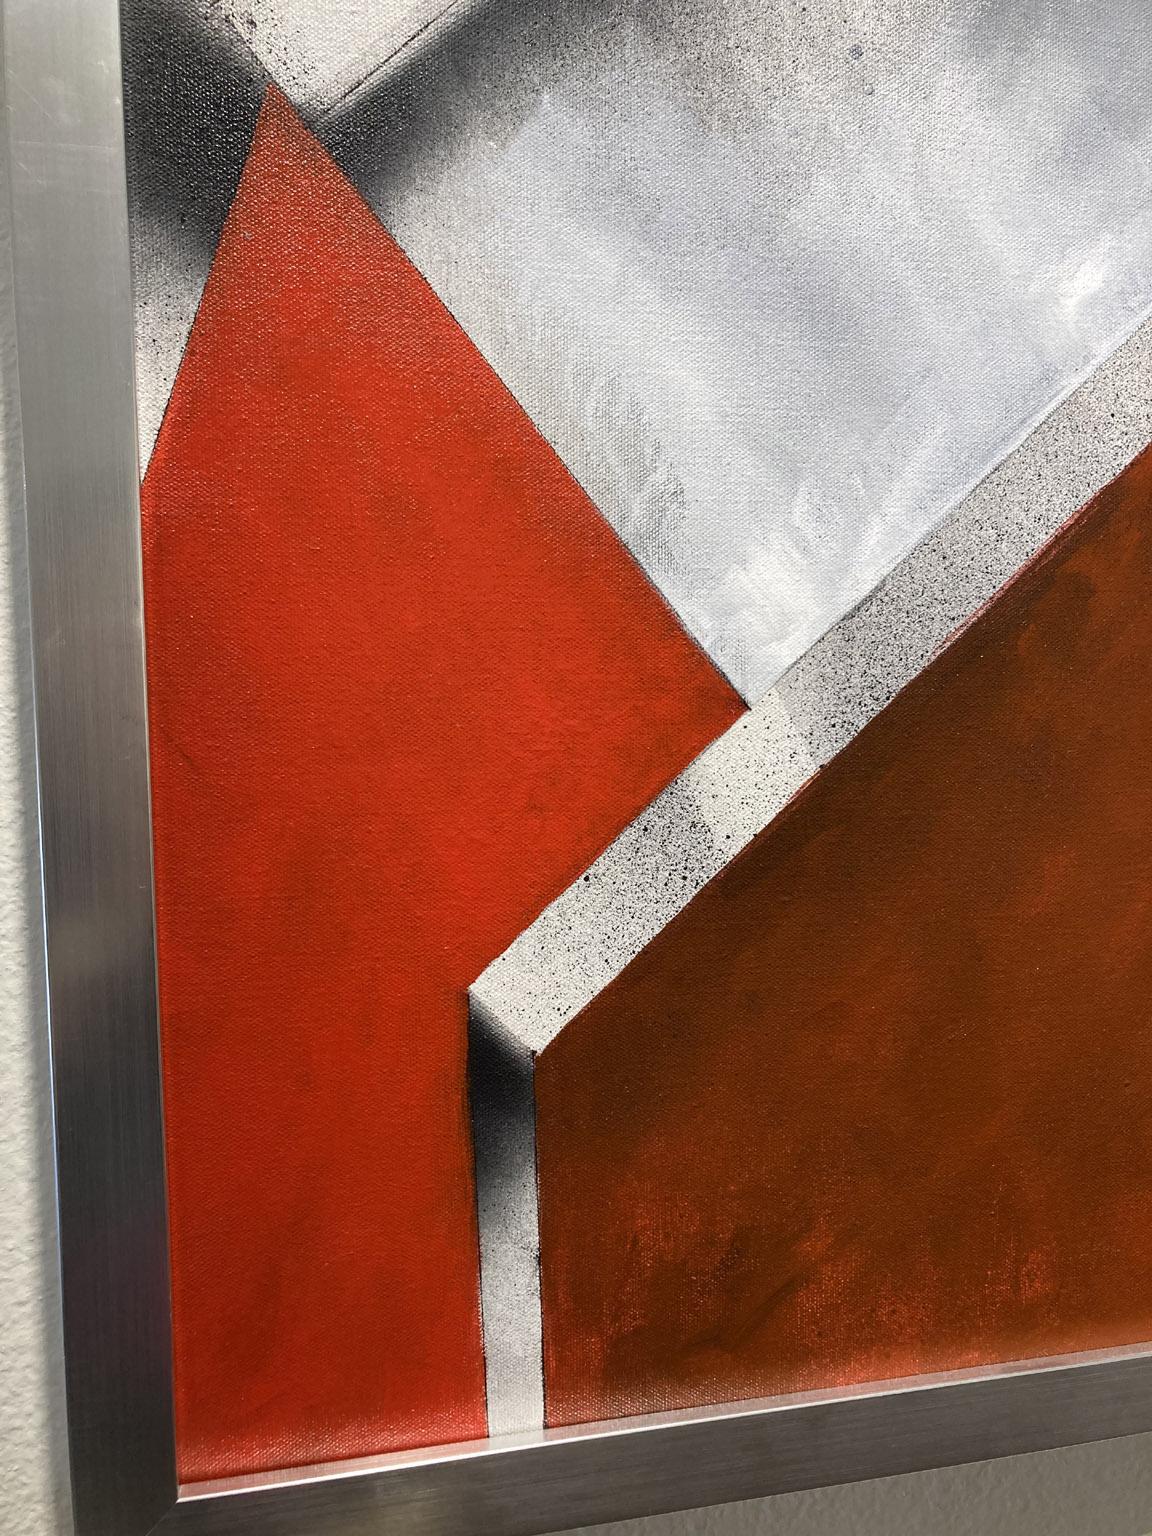 Red, Gray, Silver &White.  Composition of Oblique Construct,  is an abstract painting from a series of work by Los Angeles based artist KOOK, exploring the energy and vibrancy of architecture. Ready to ship with framed silver. 